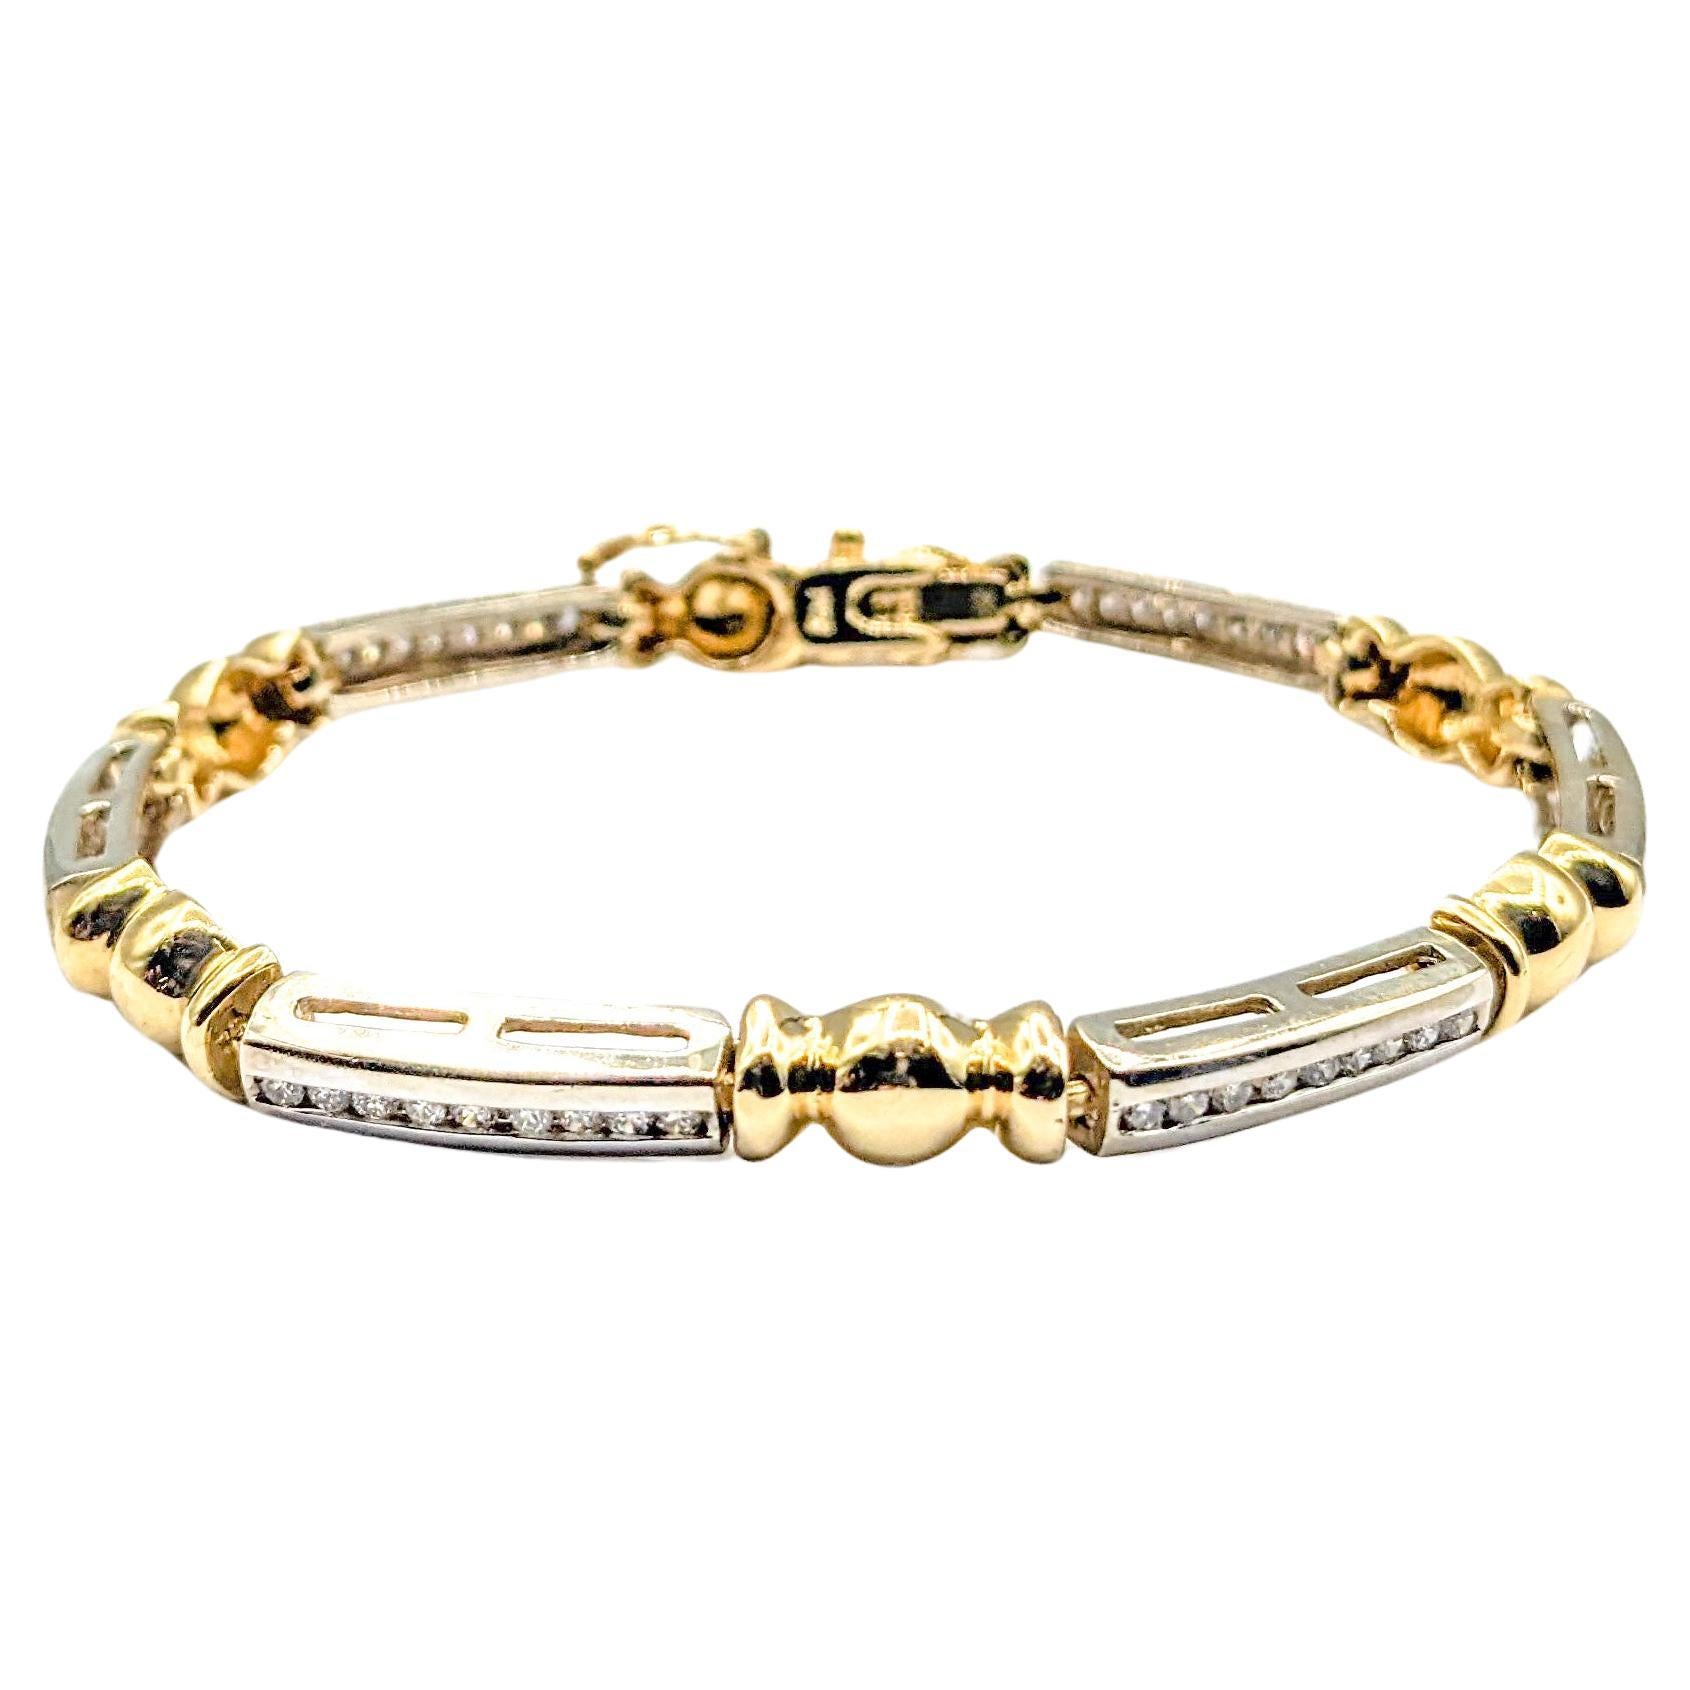 Unique Bar and Ball Design Bracelet In Two-Tone Gold